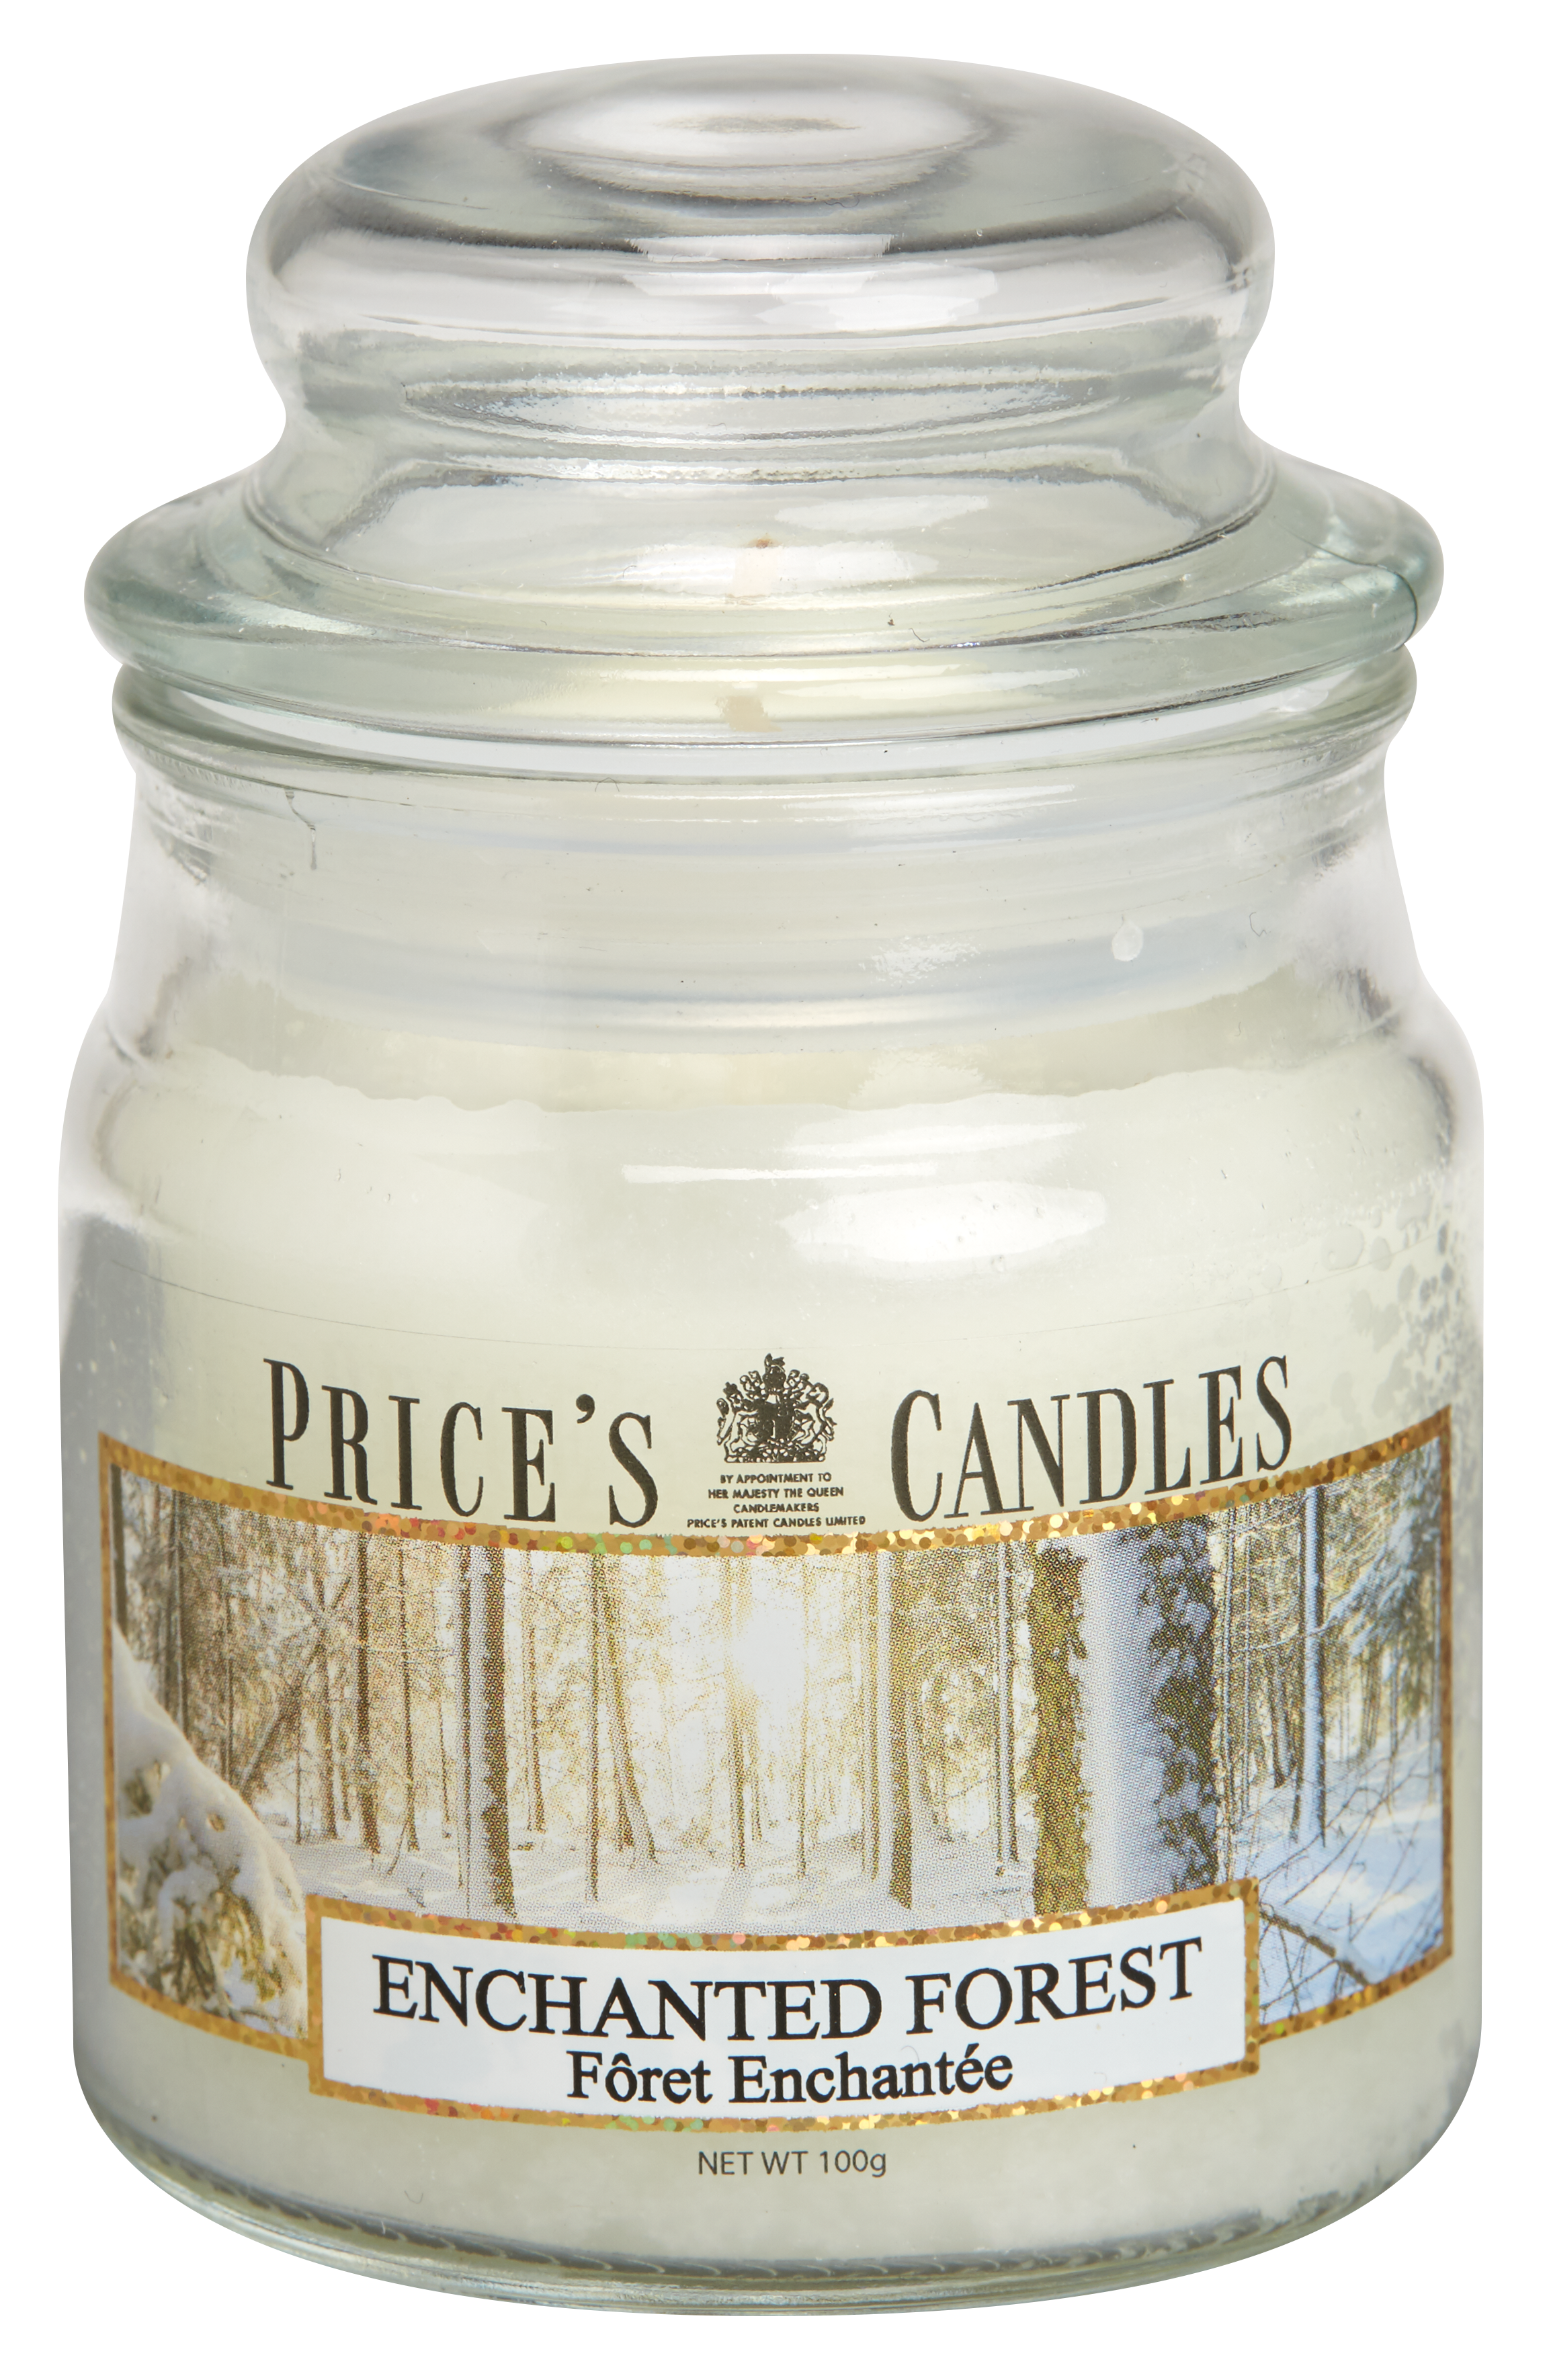 Prices Candle "Enchanted Forest" 100g   